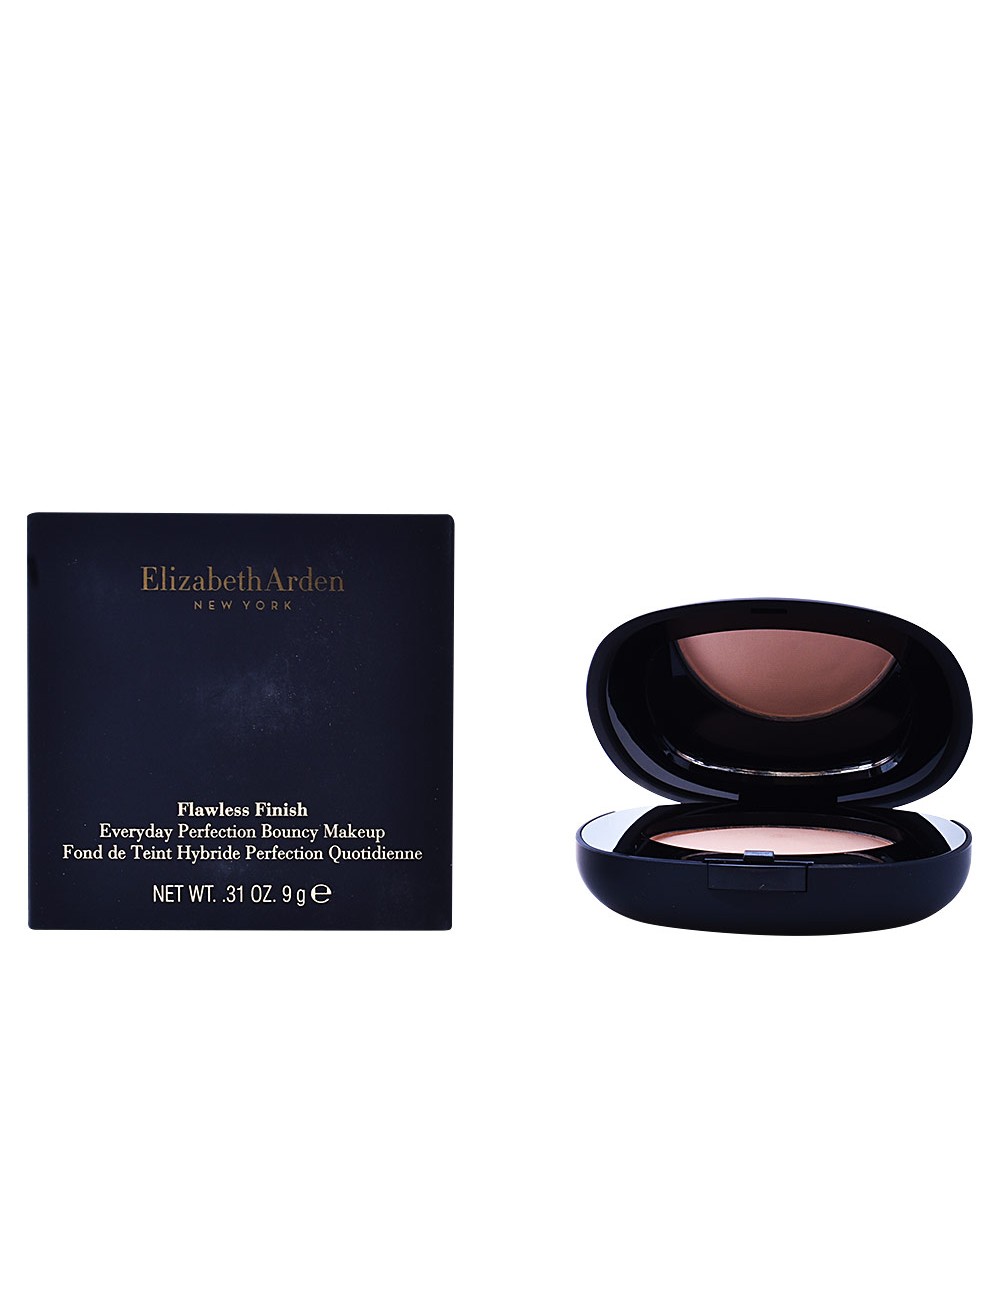 FLAWLESS FINISH everyday perfection makeup 05-cream